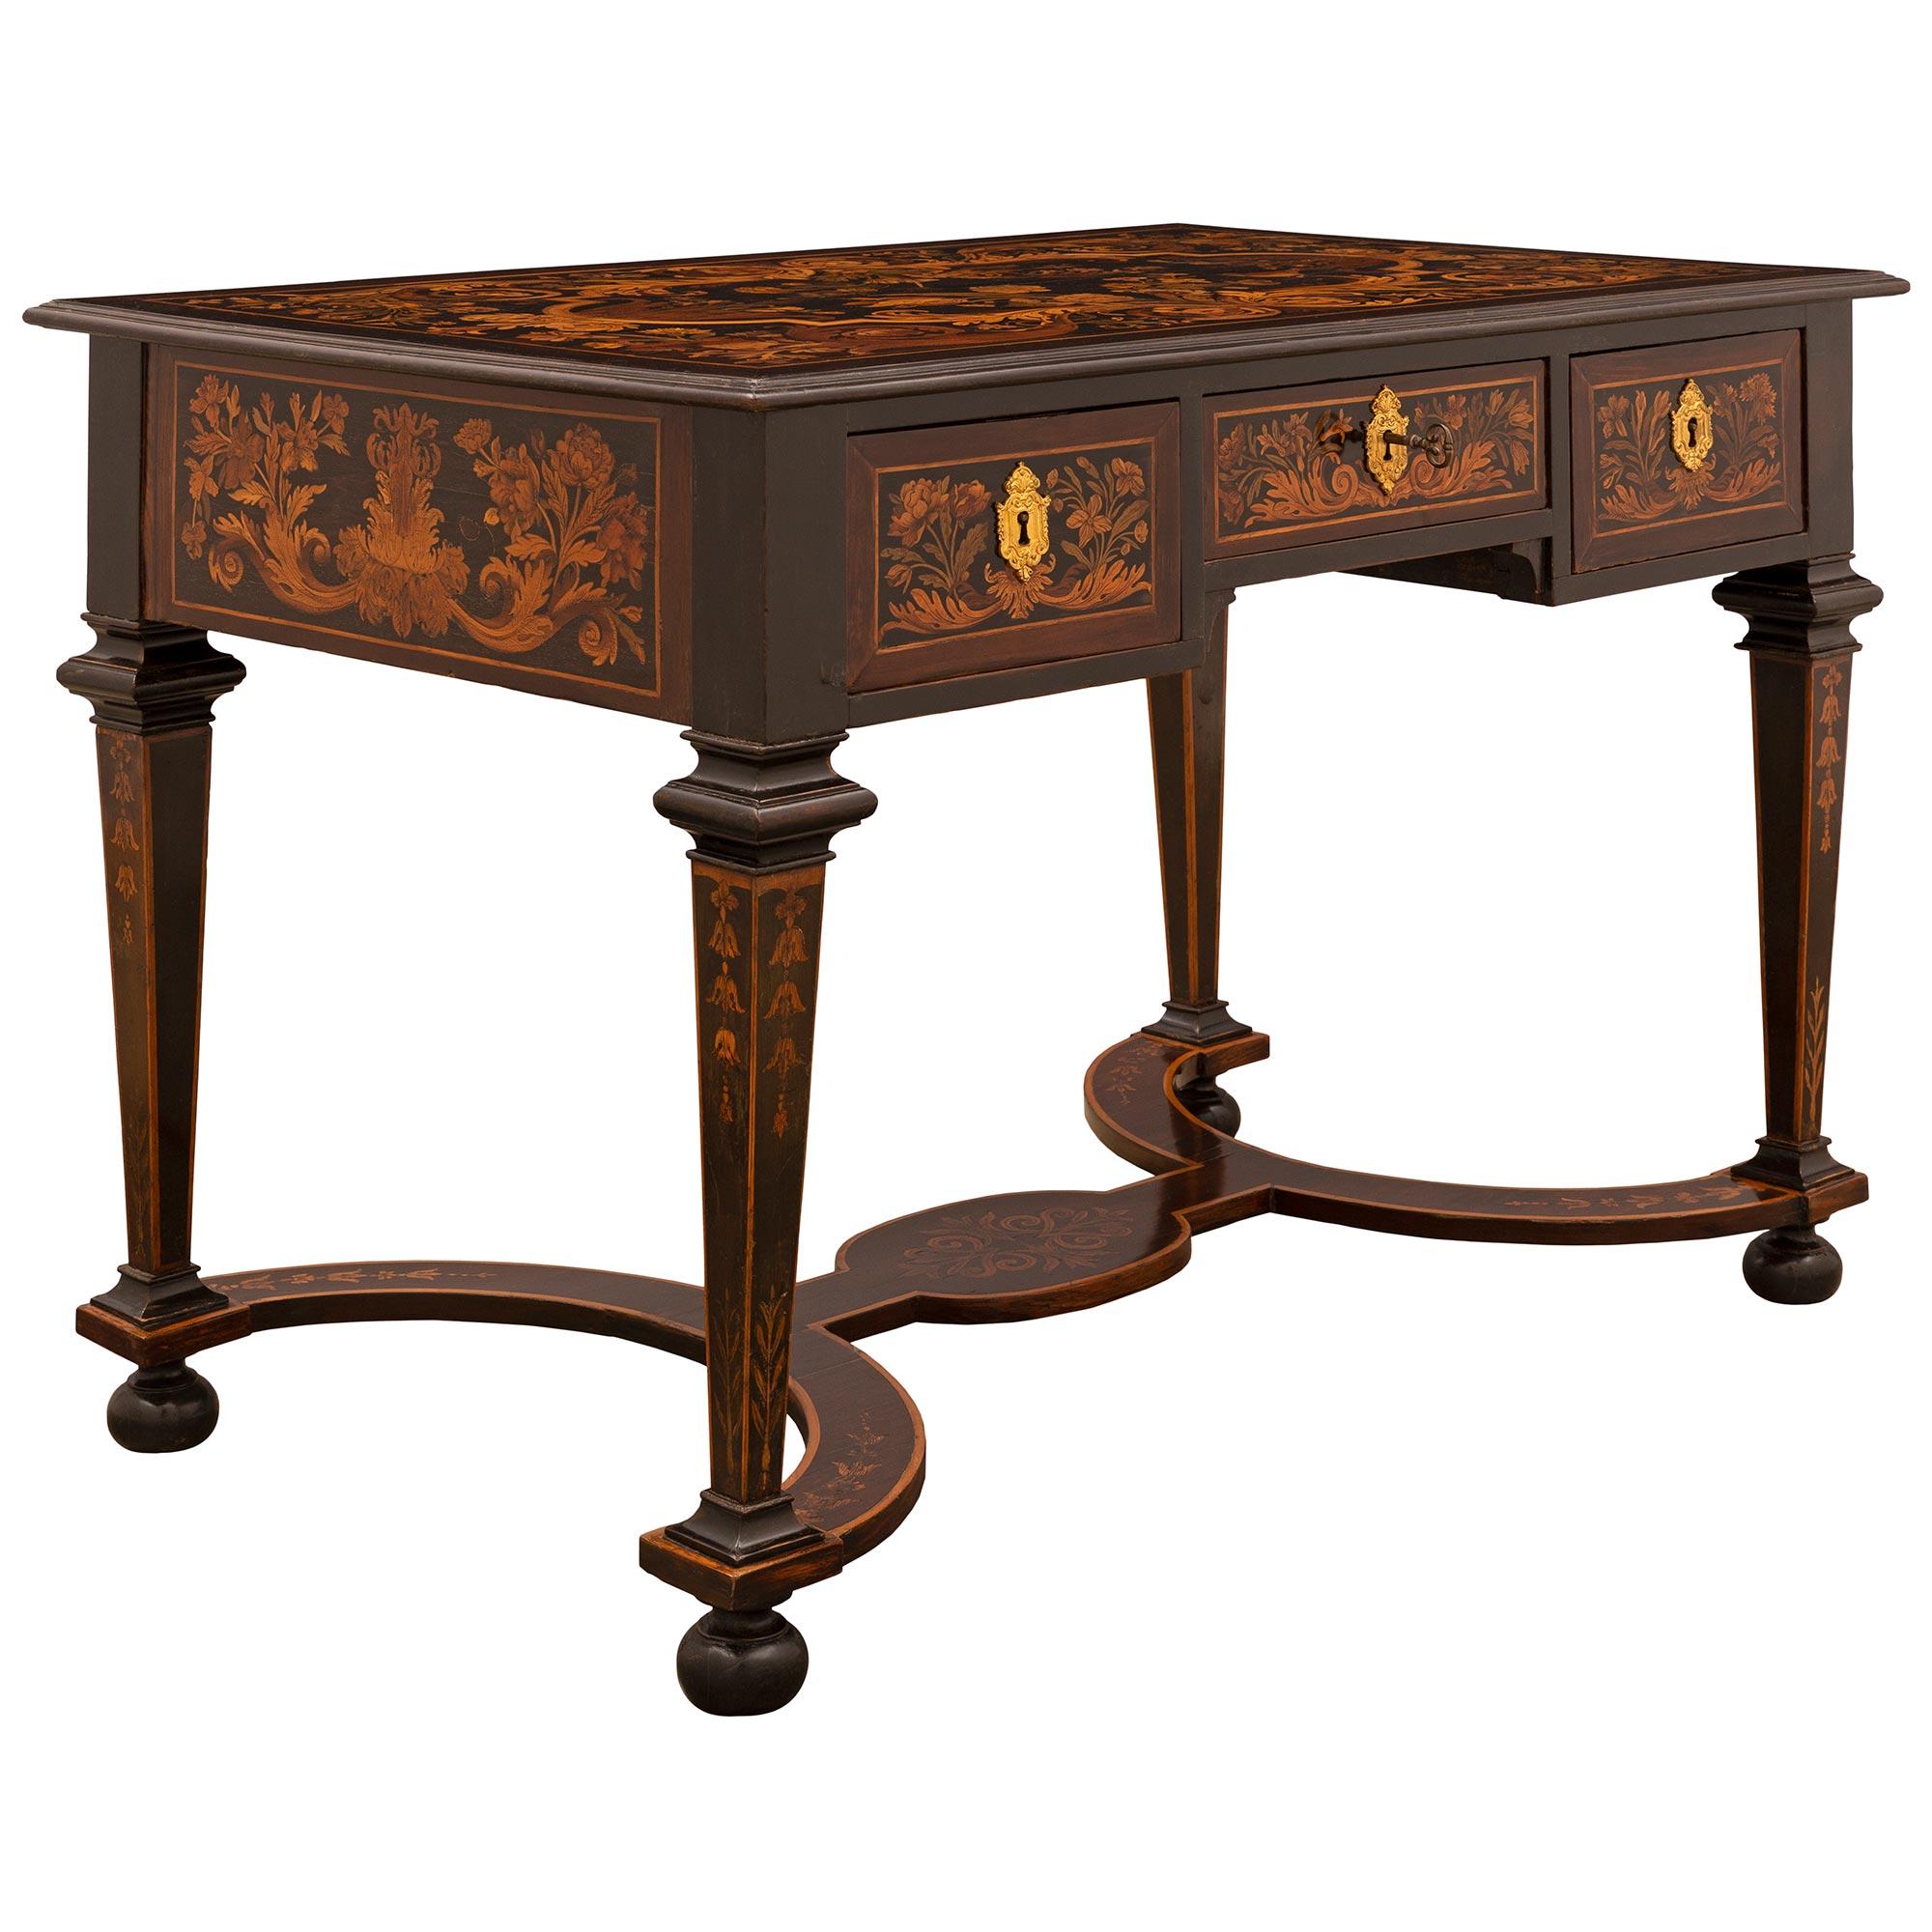 Italian Early 19th Century Ebonized Fruitwood, Exotic Wood, and Ormolu Desk In Good Condition For Sale In West Palm Beach, FL